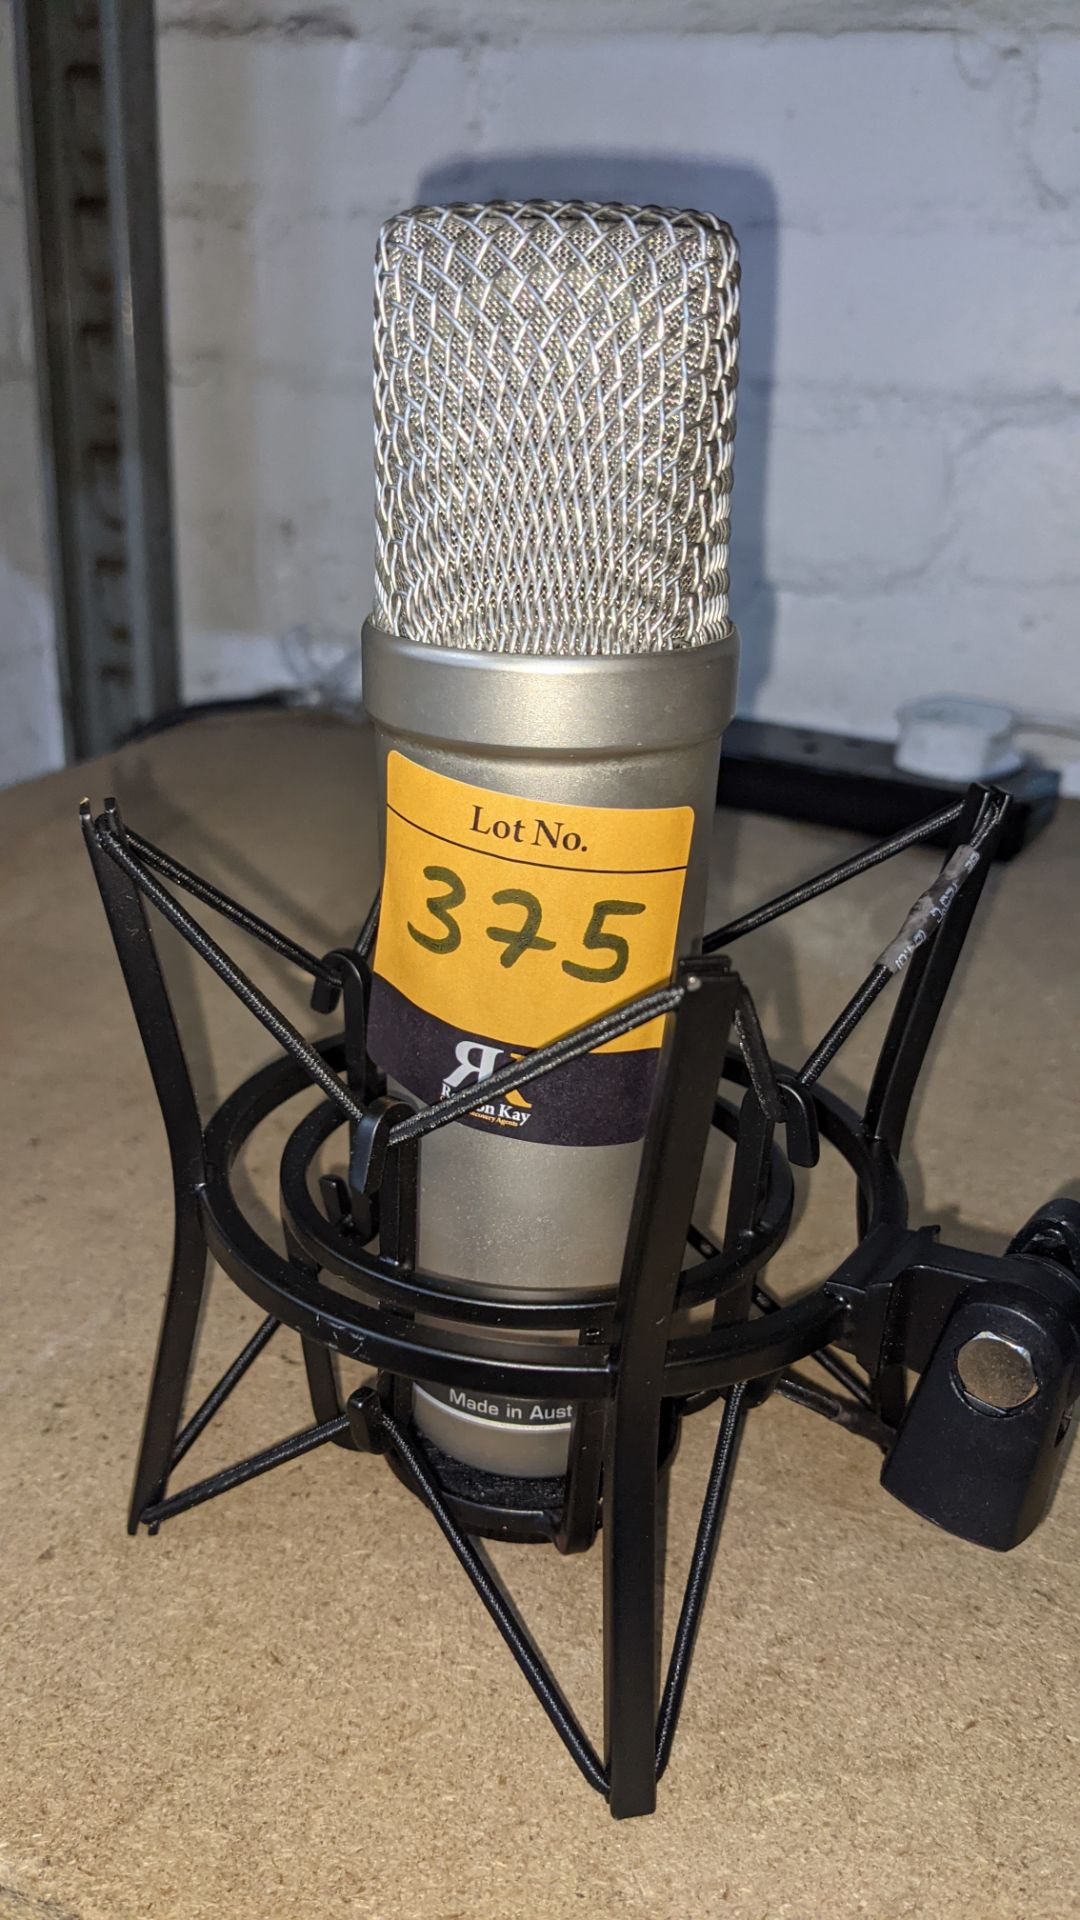 Rode model NT1-A microphone - Image 2 of 6